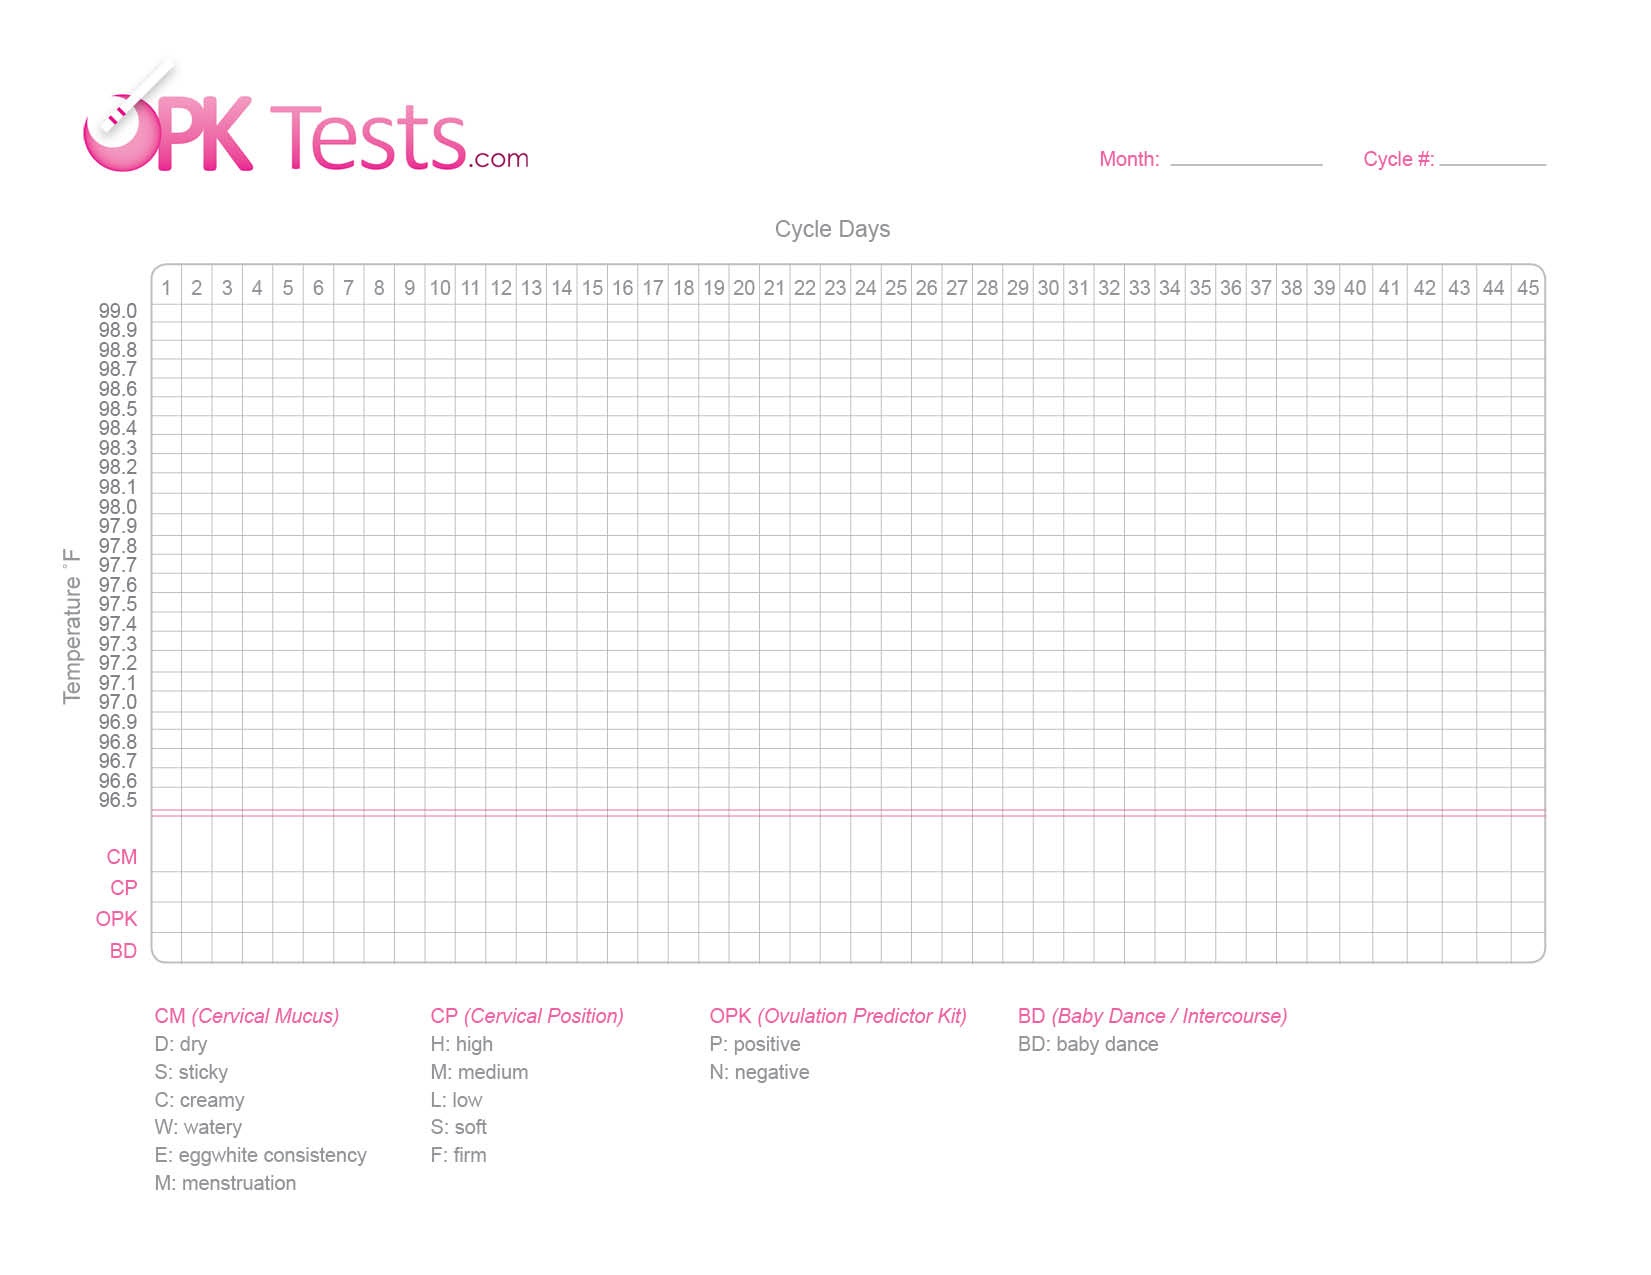 Free Fertilty Chart - Opk Tests Buy Ovulation Tests And Pregnancy - Free Printable Fertility Chart